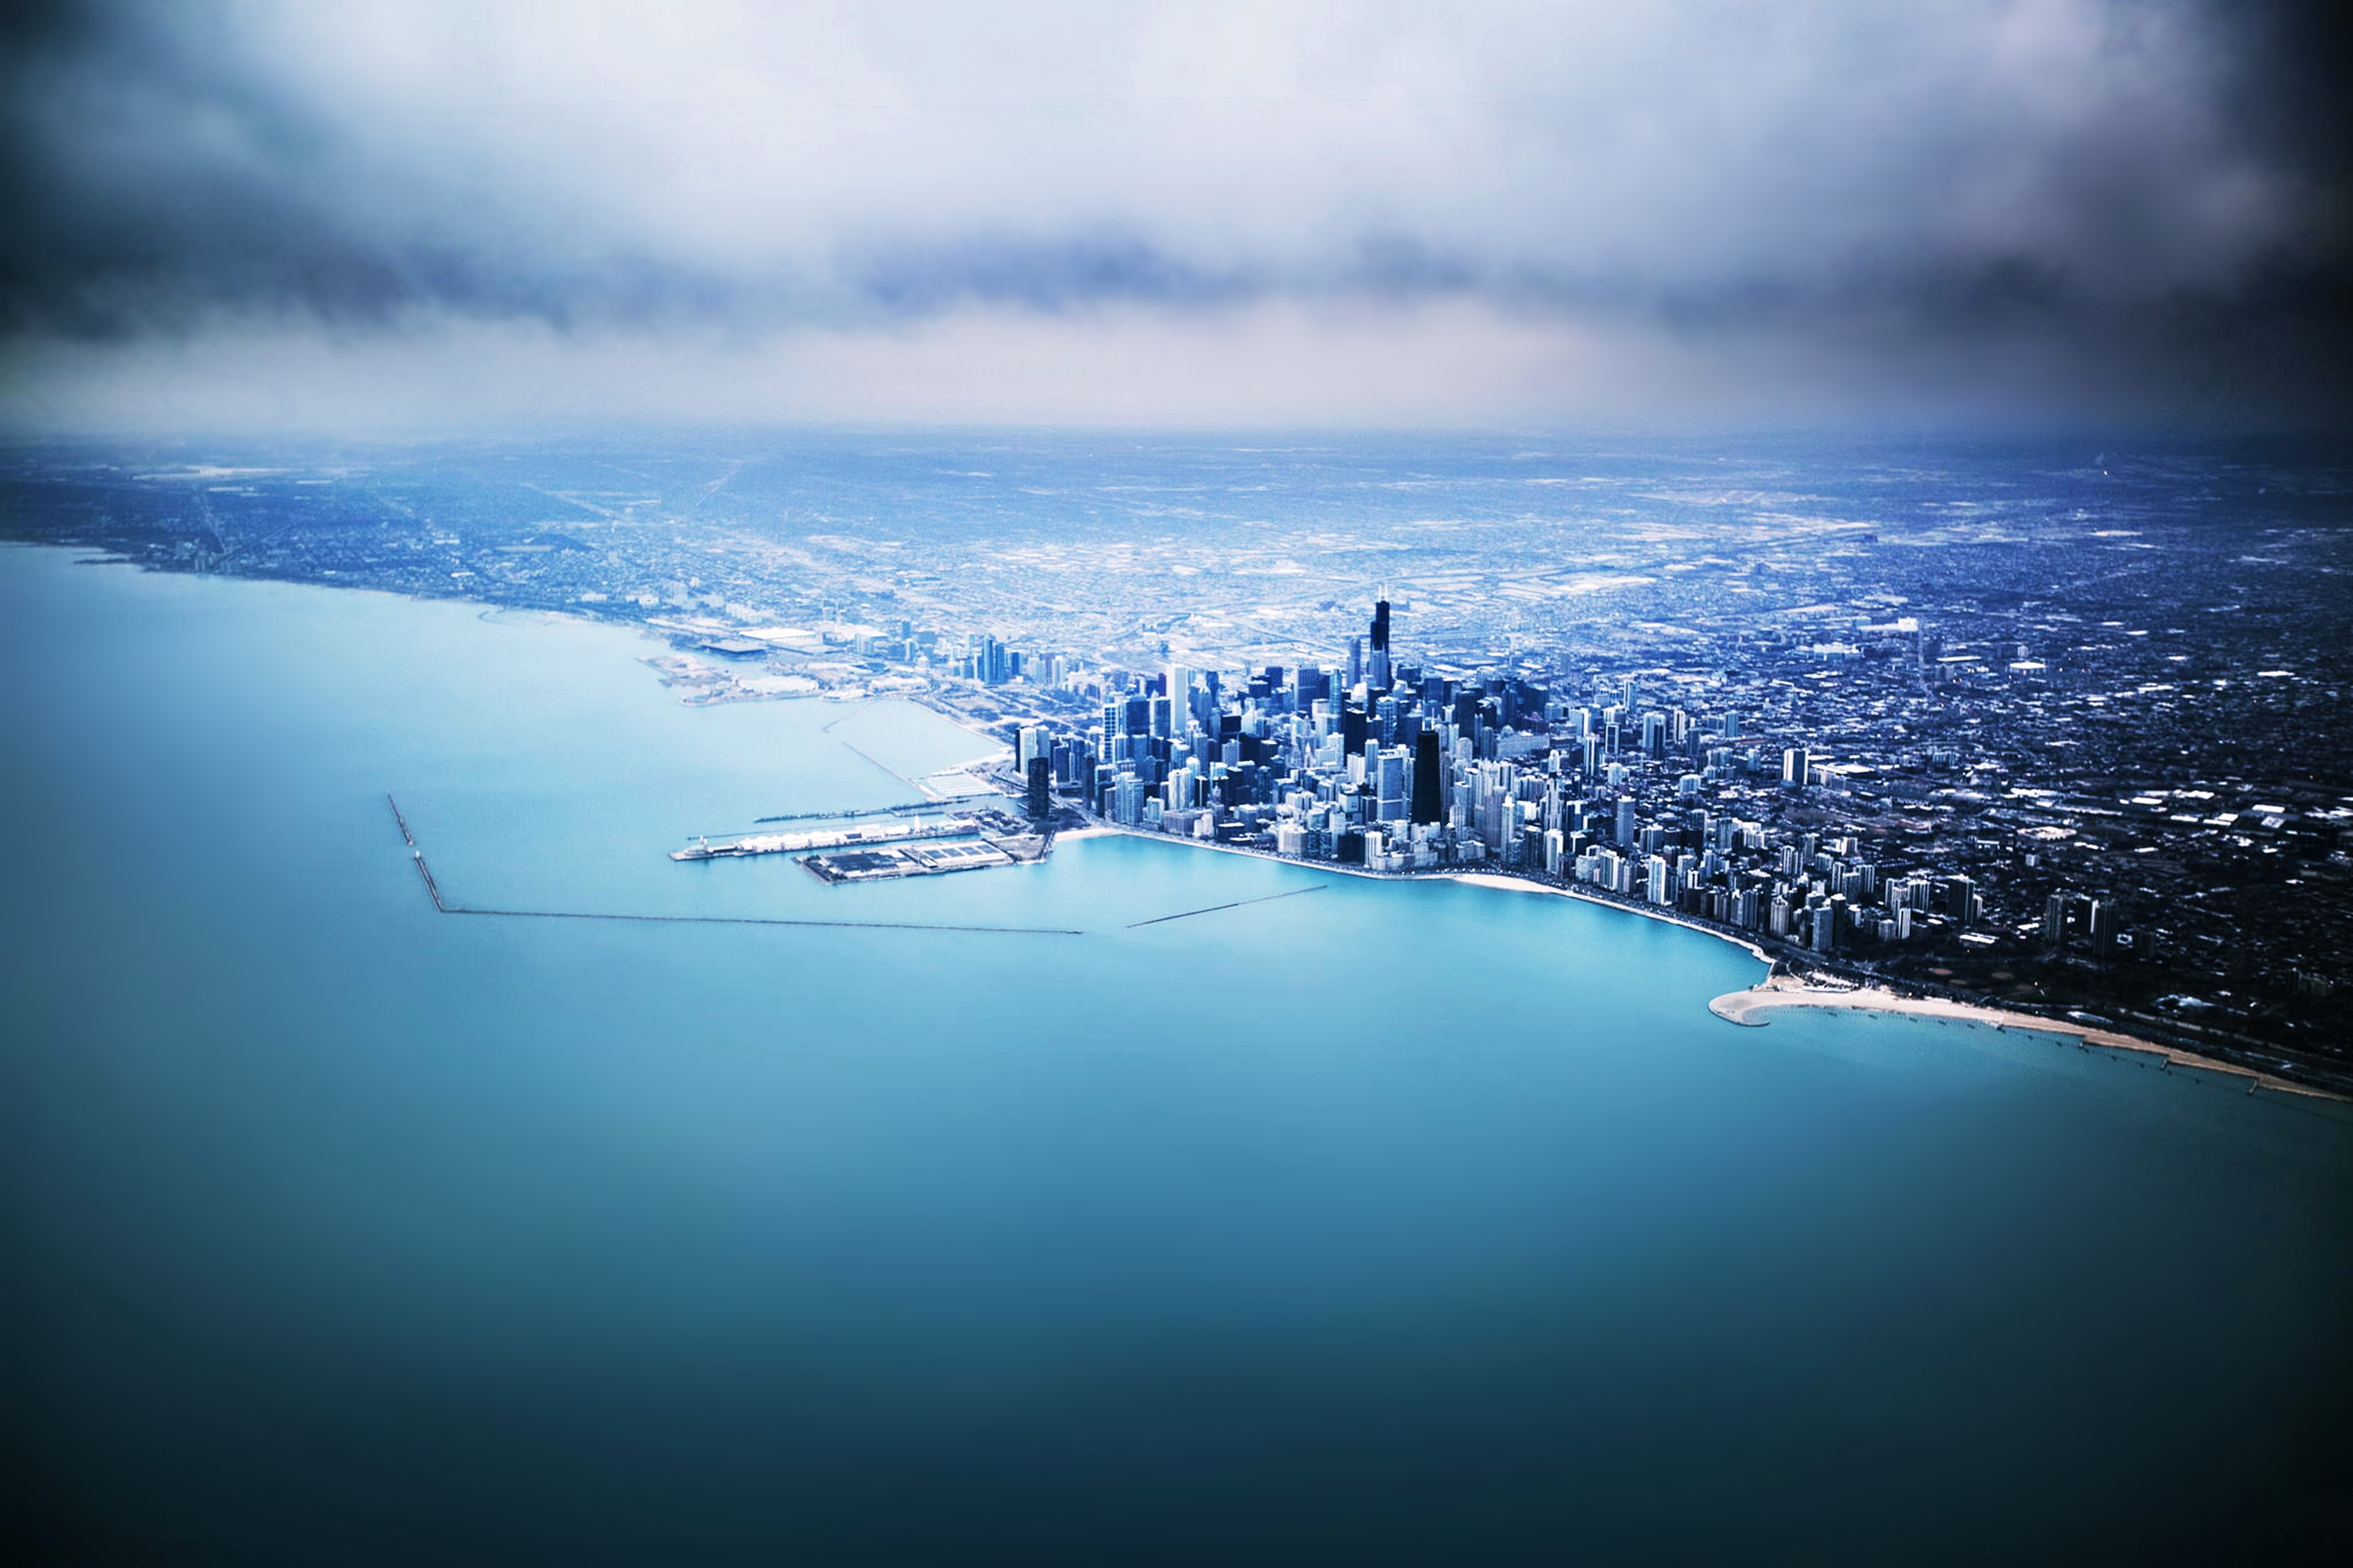 Download mobile wallpaper Chicago, Skyscraper, Sea, Usa, Cities, Man Made, Ocean, Cloud, City, Landscape for free.